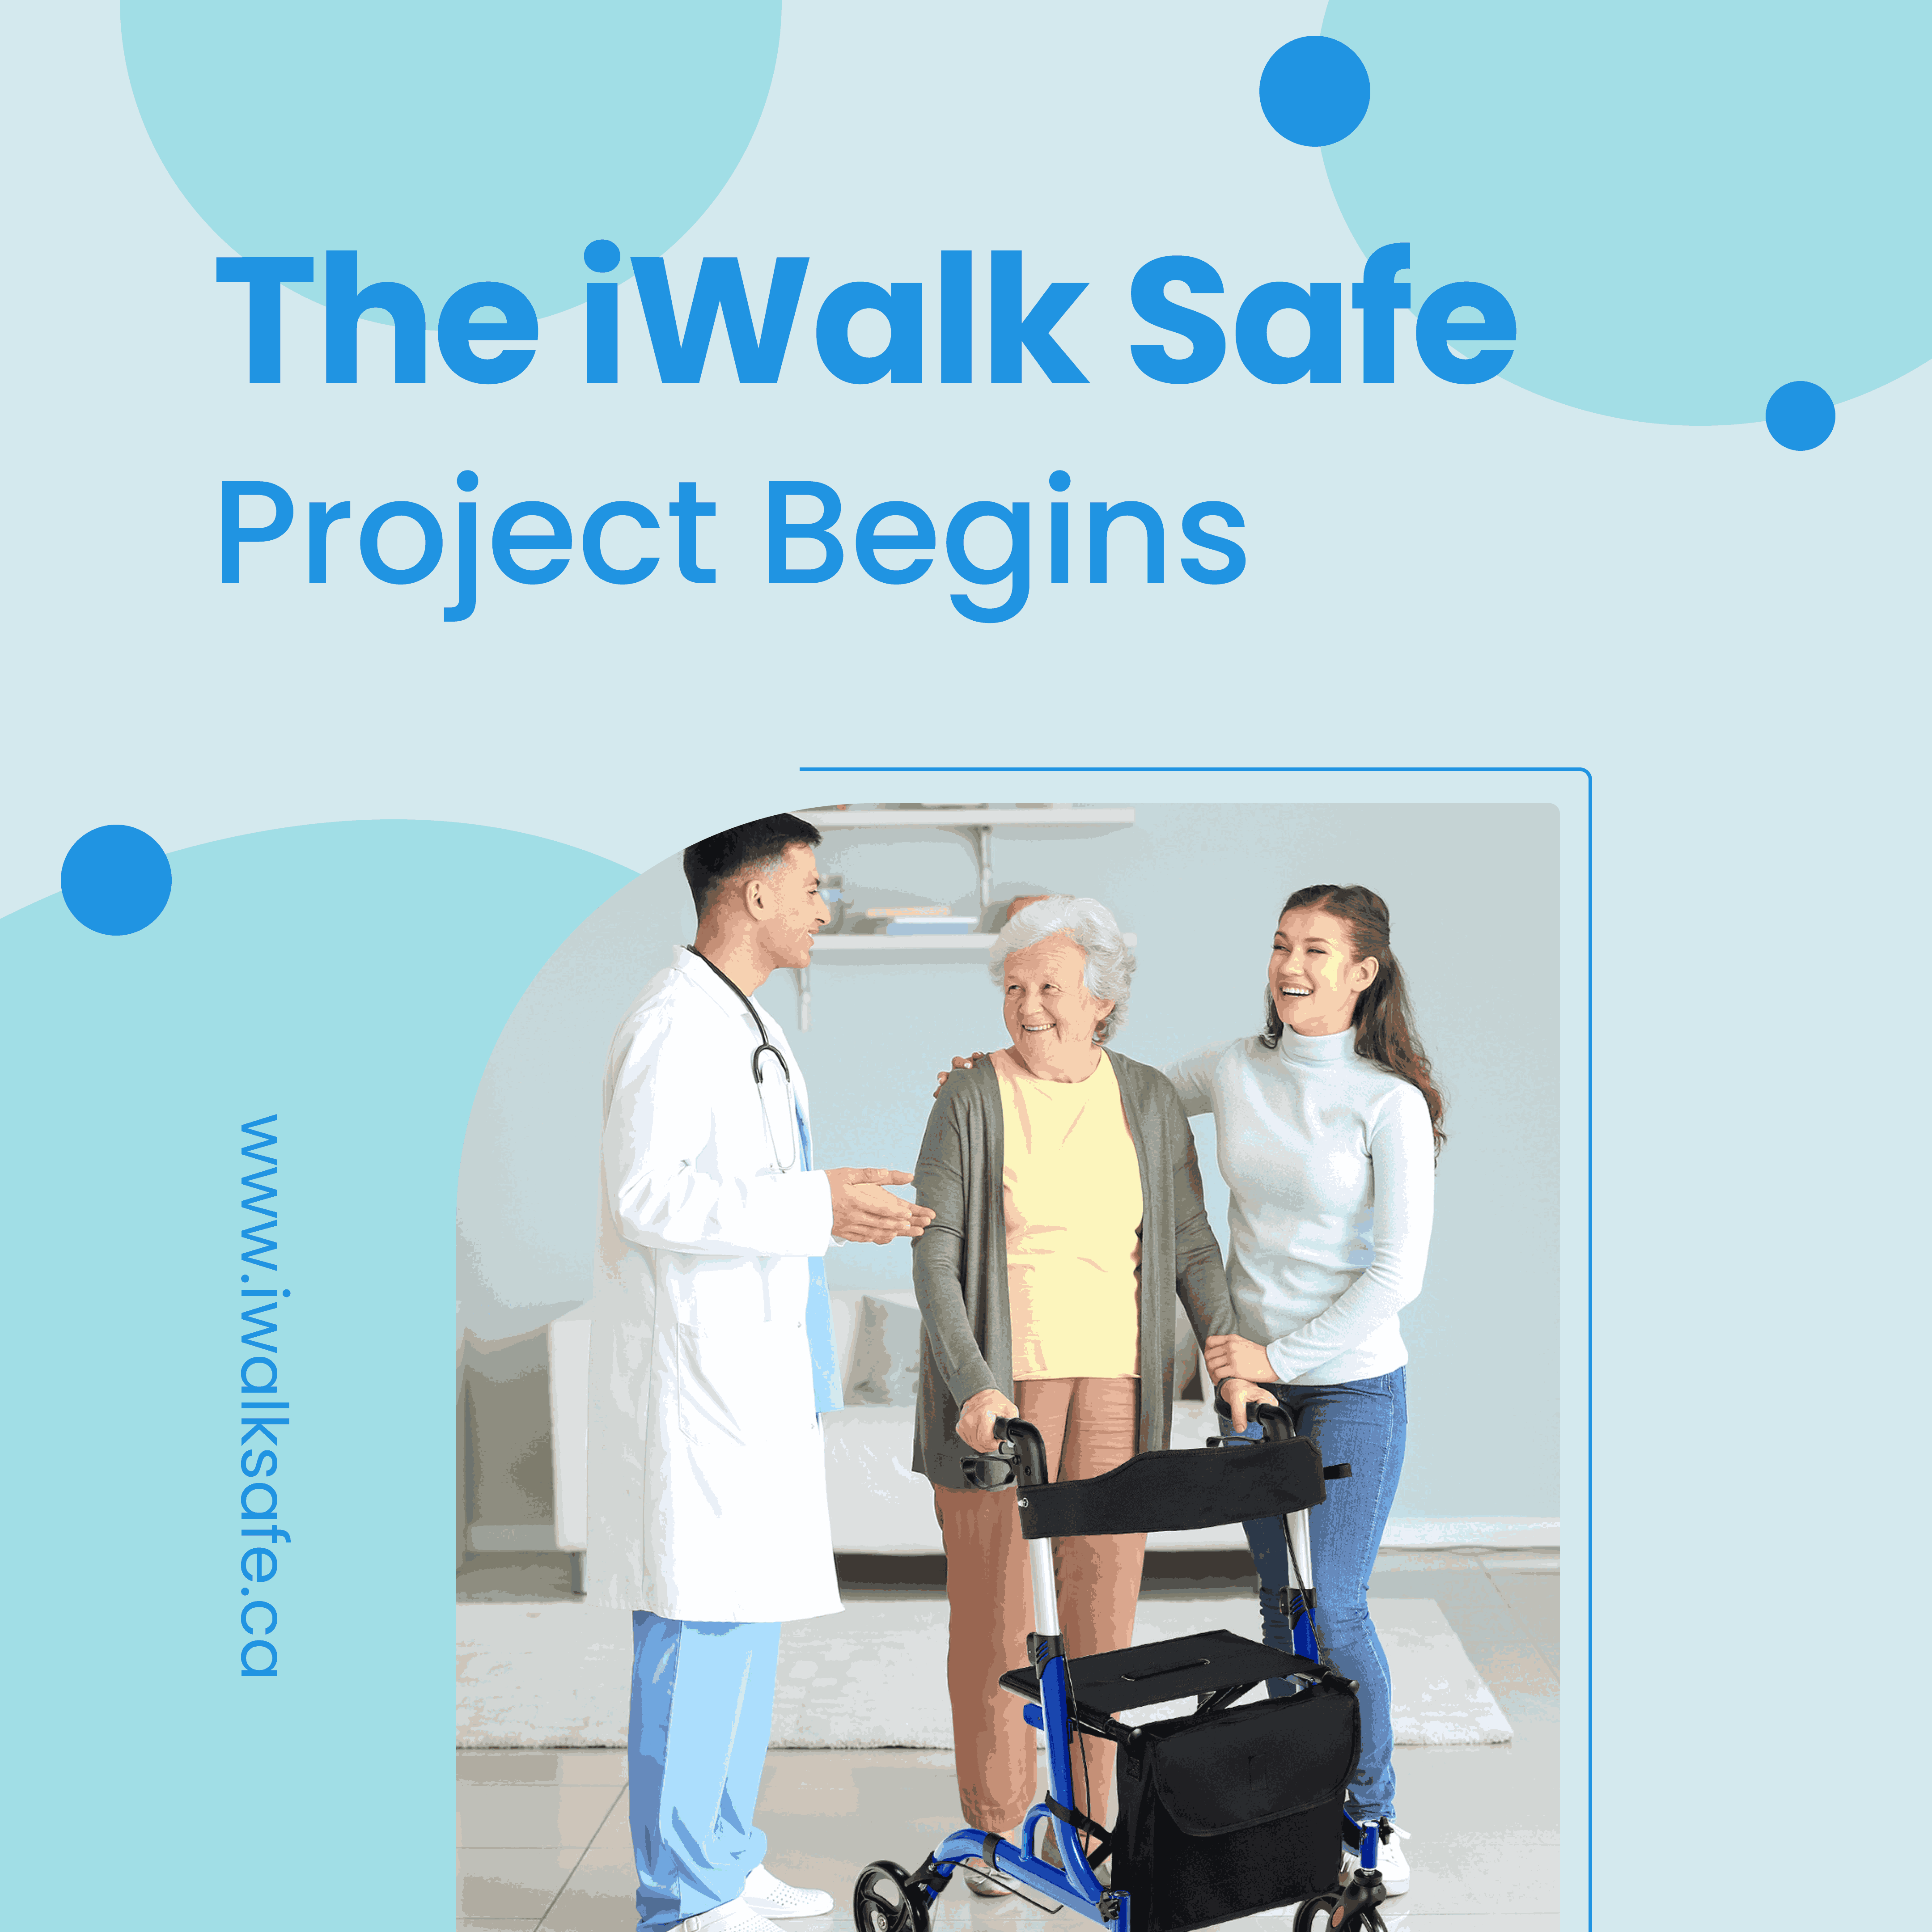 “Step into Safety: The iWalk Safe Project Begins”